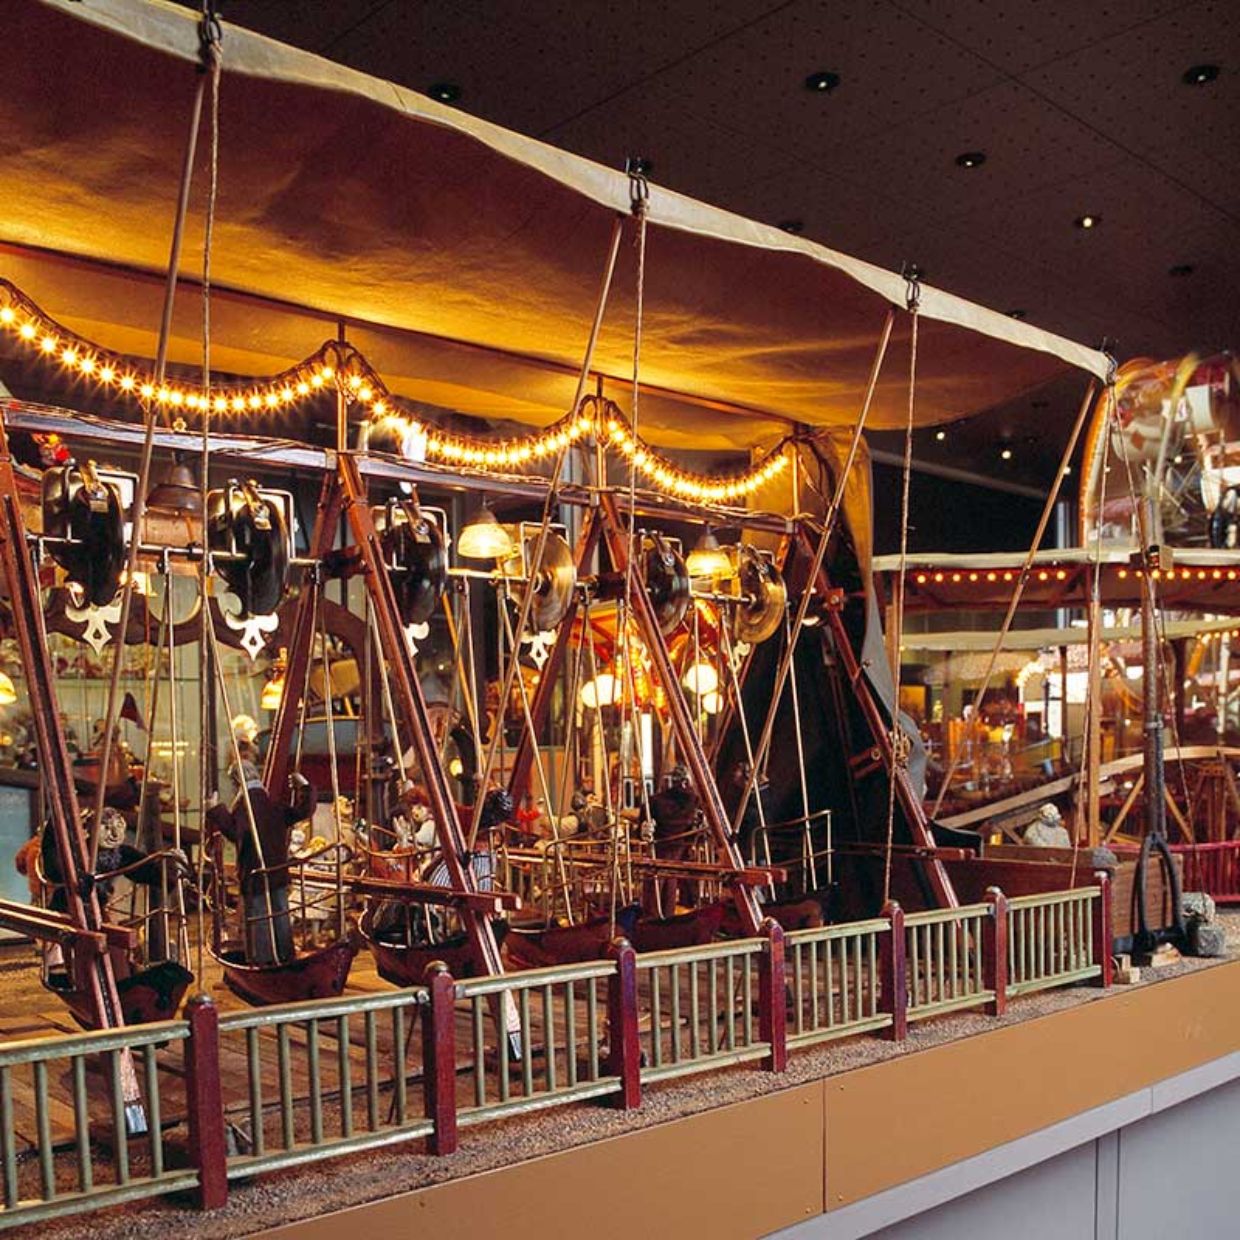 Herbstmesse, 1990, Other countries